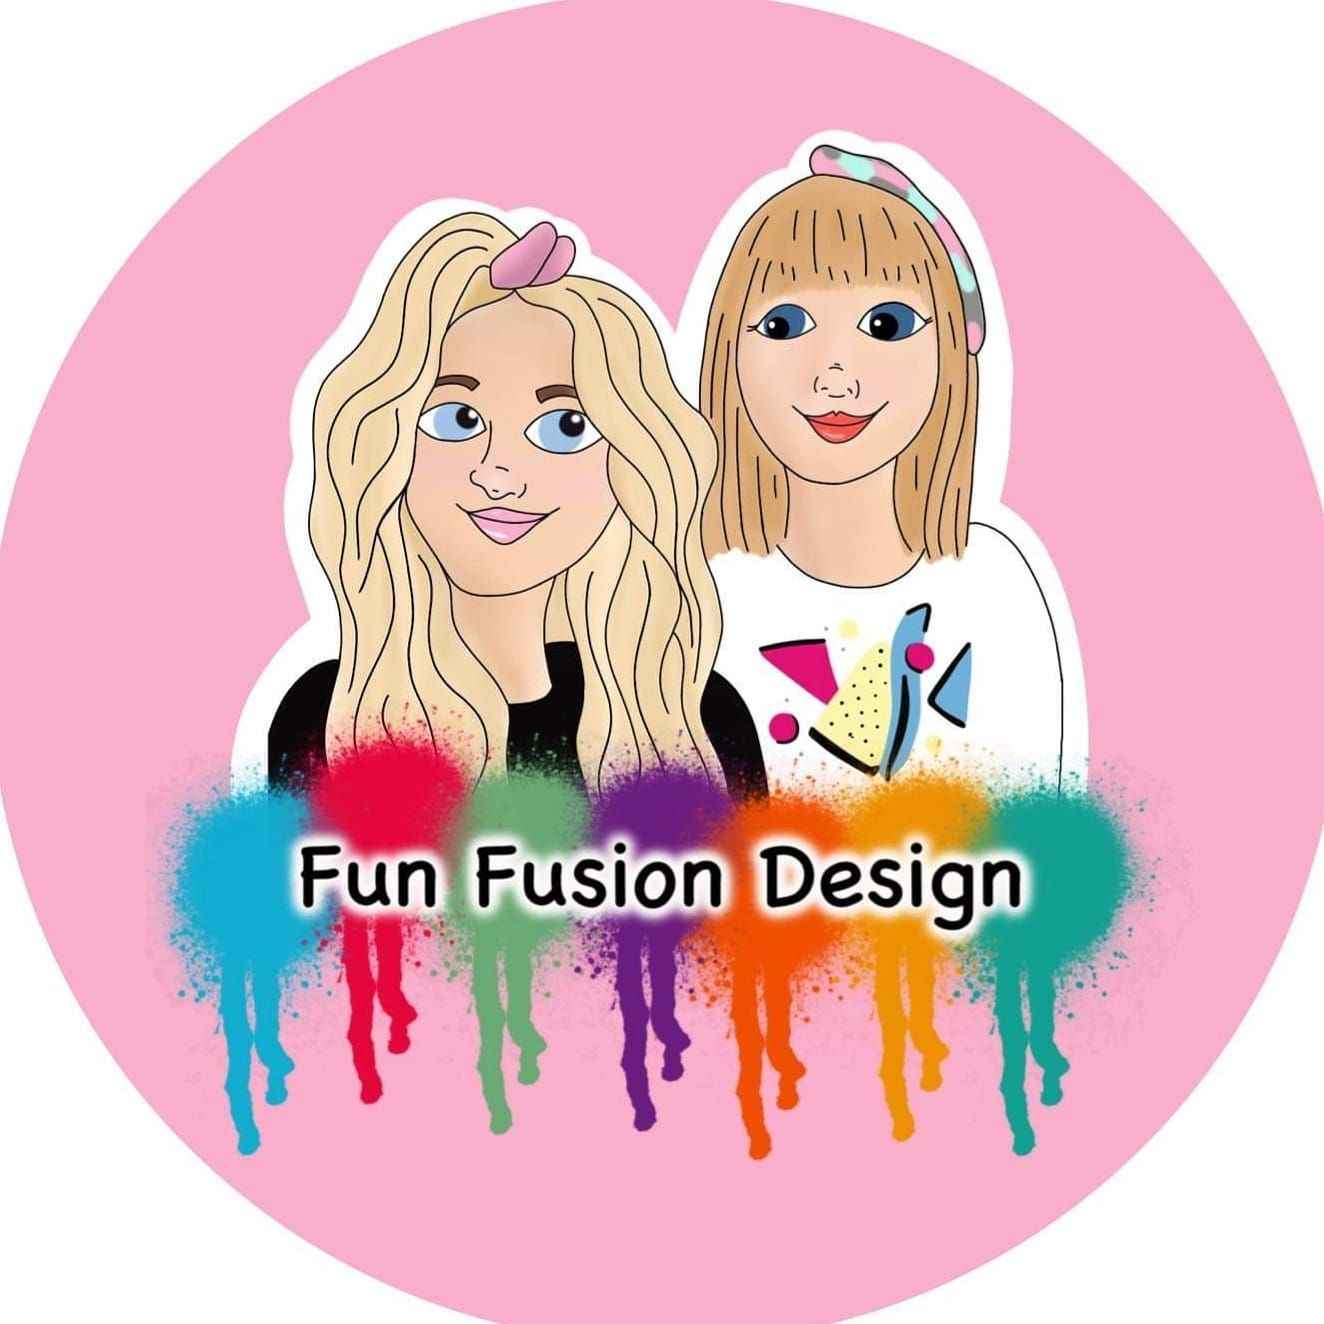 This shop is called FunFusionDesign 